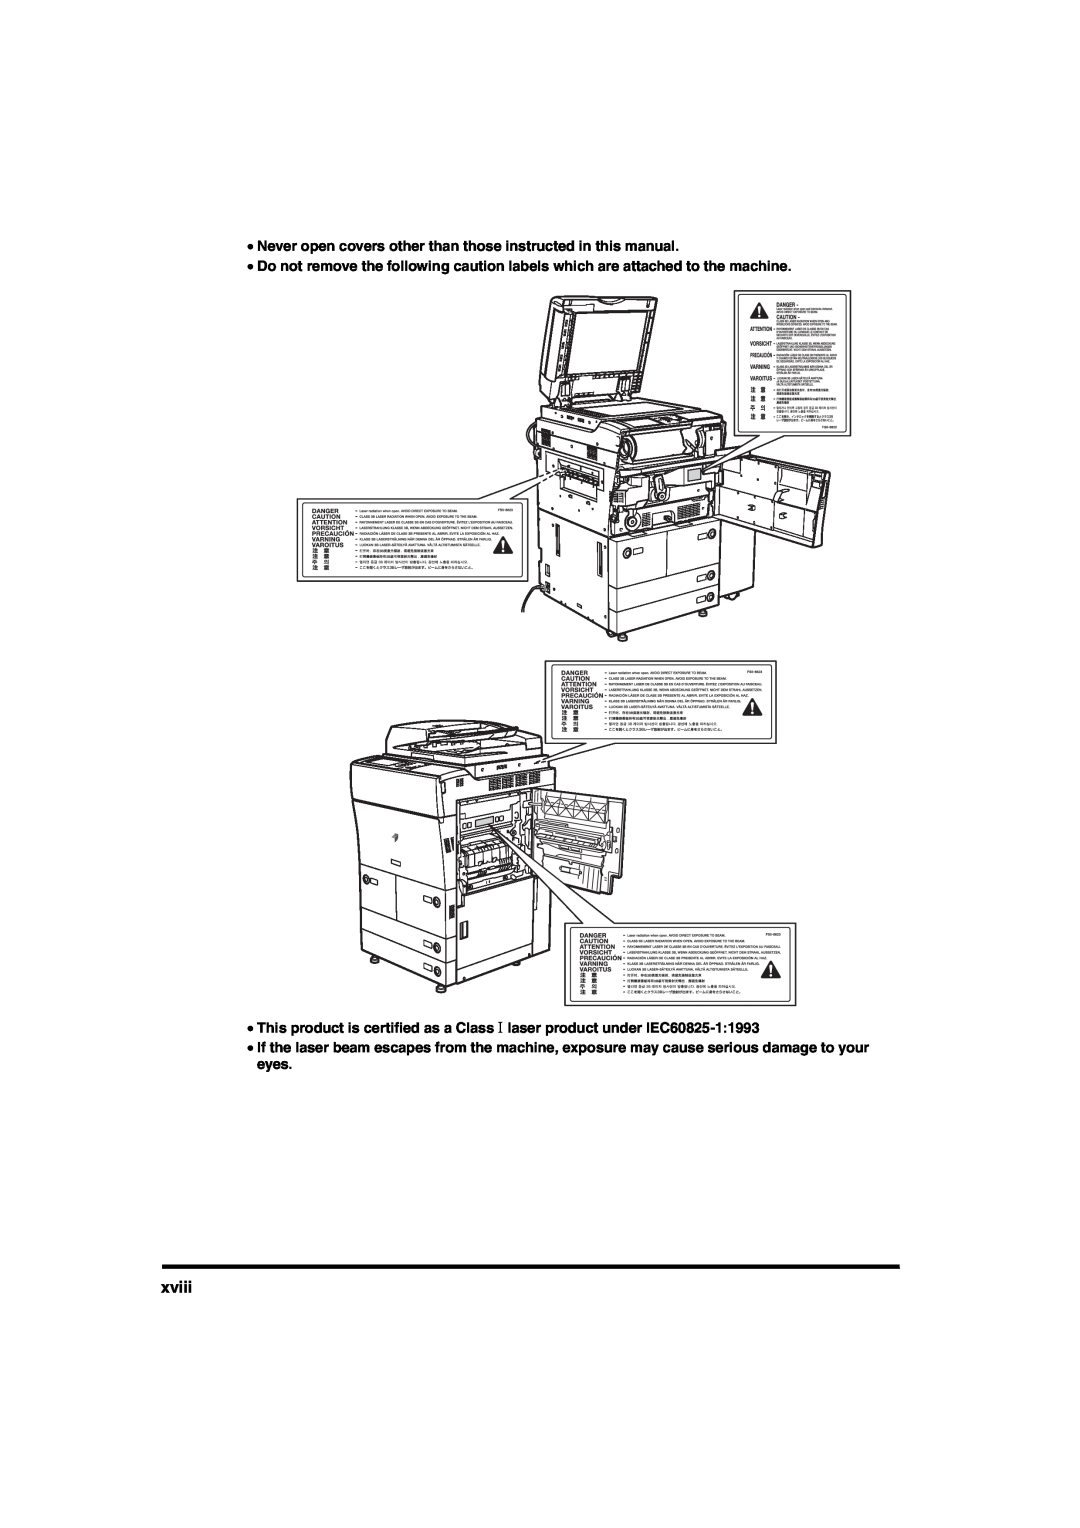 Canon iR6570 xviii, Never open covers other than those instructed in this manual 